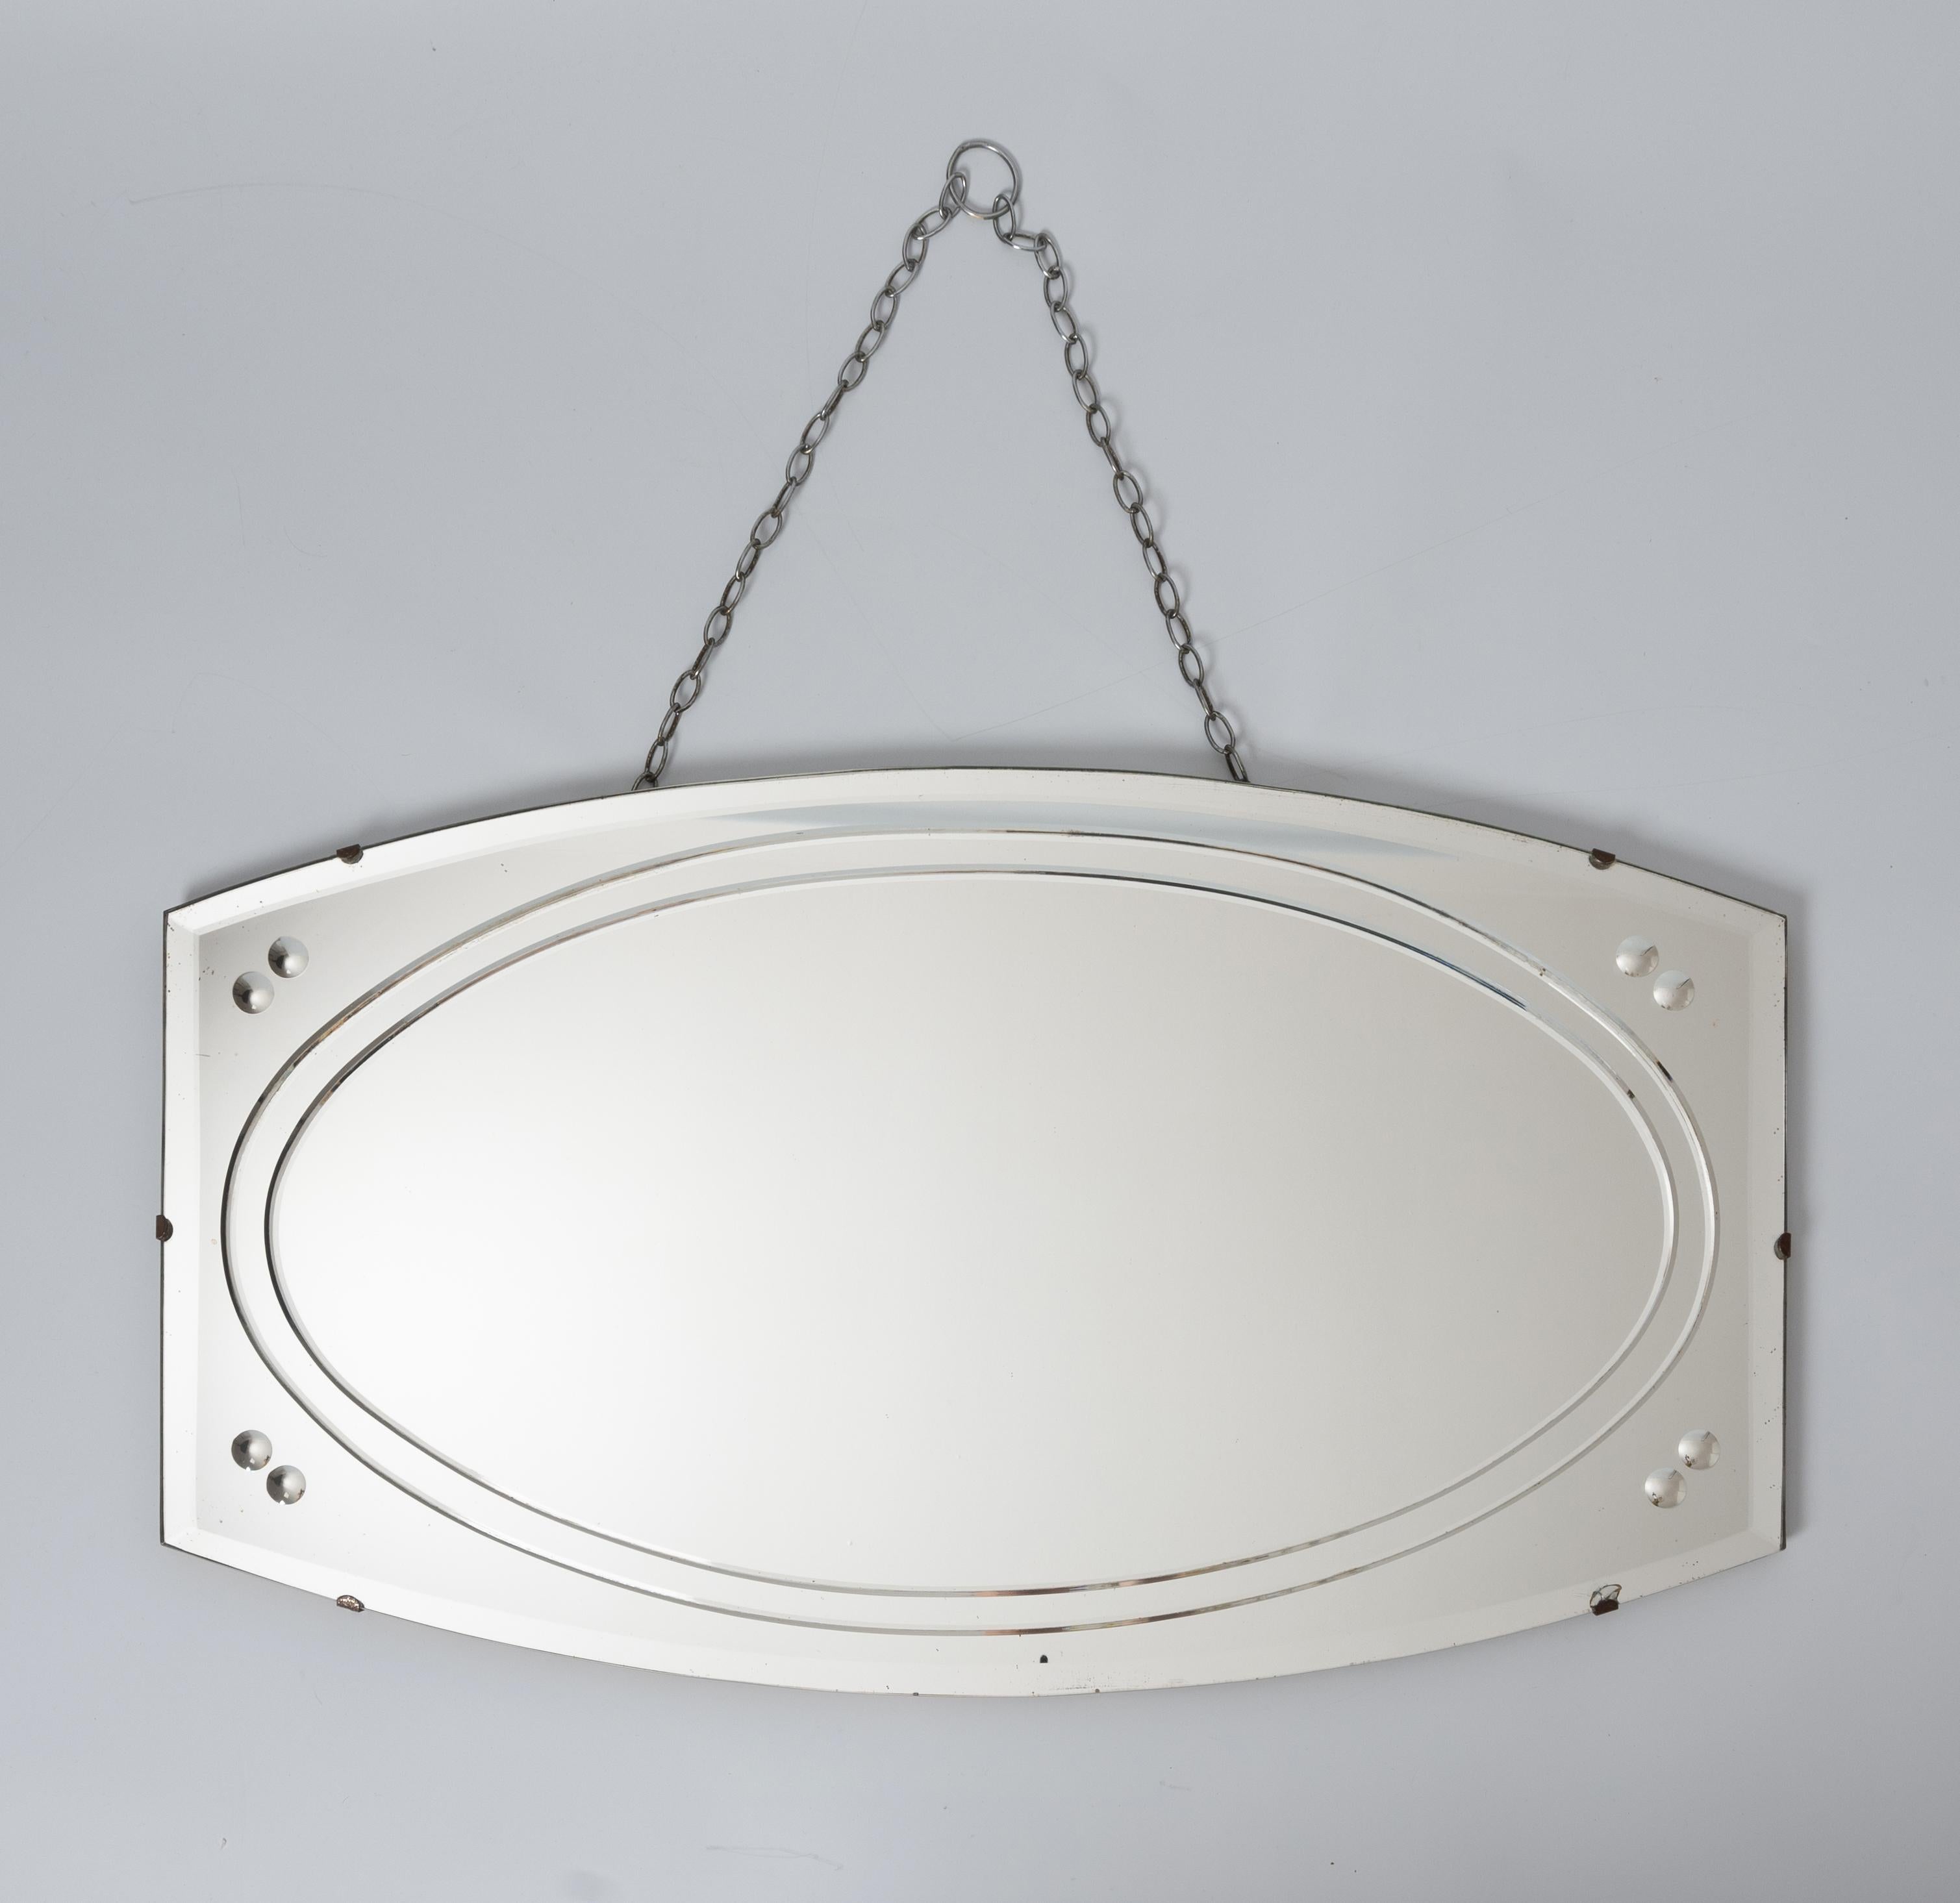 French Art Deco Wall Mirror C.1930
Etched detailing with reverse cut optics in the four corners.
In good condition commensurate with age (please refer to photos).